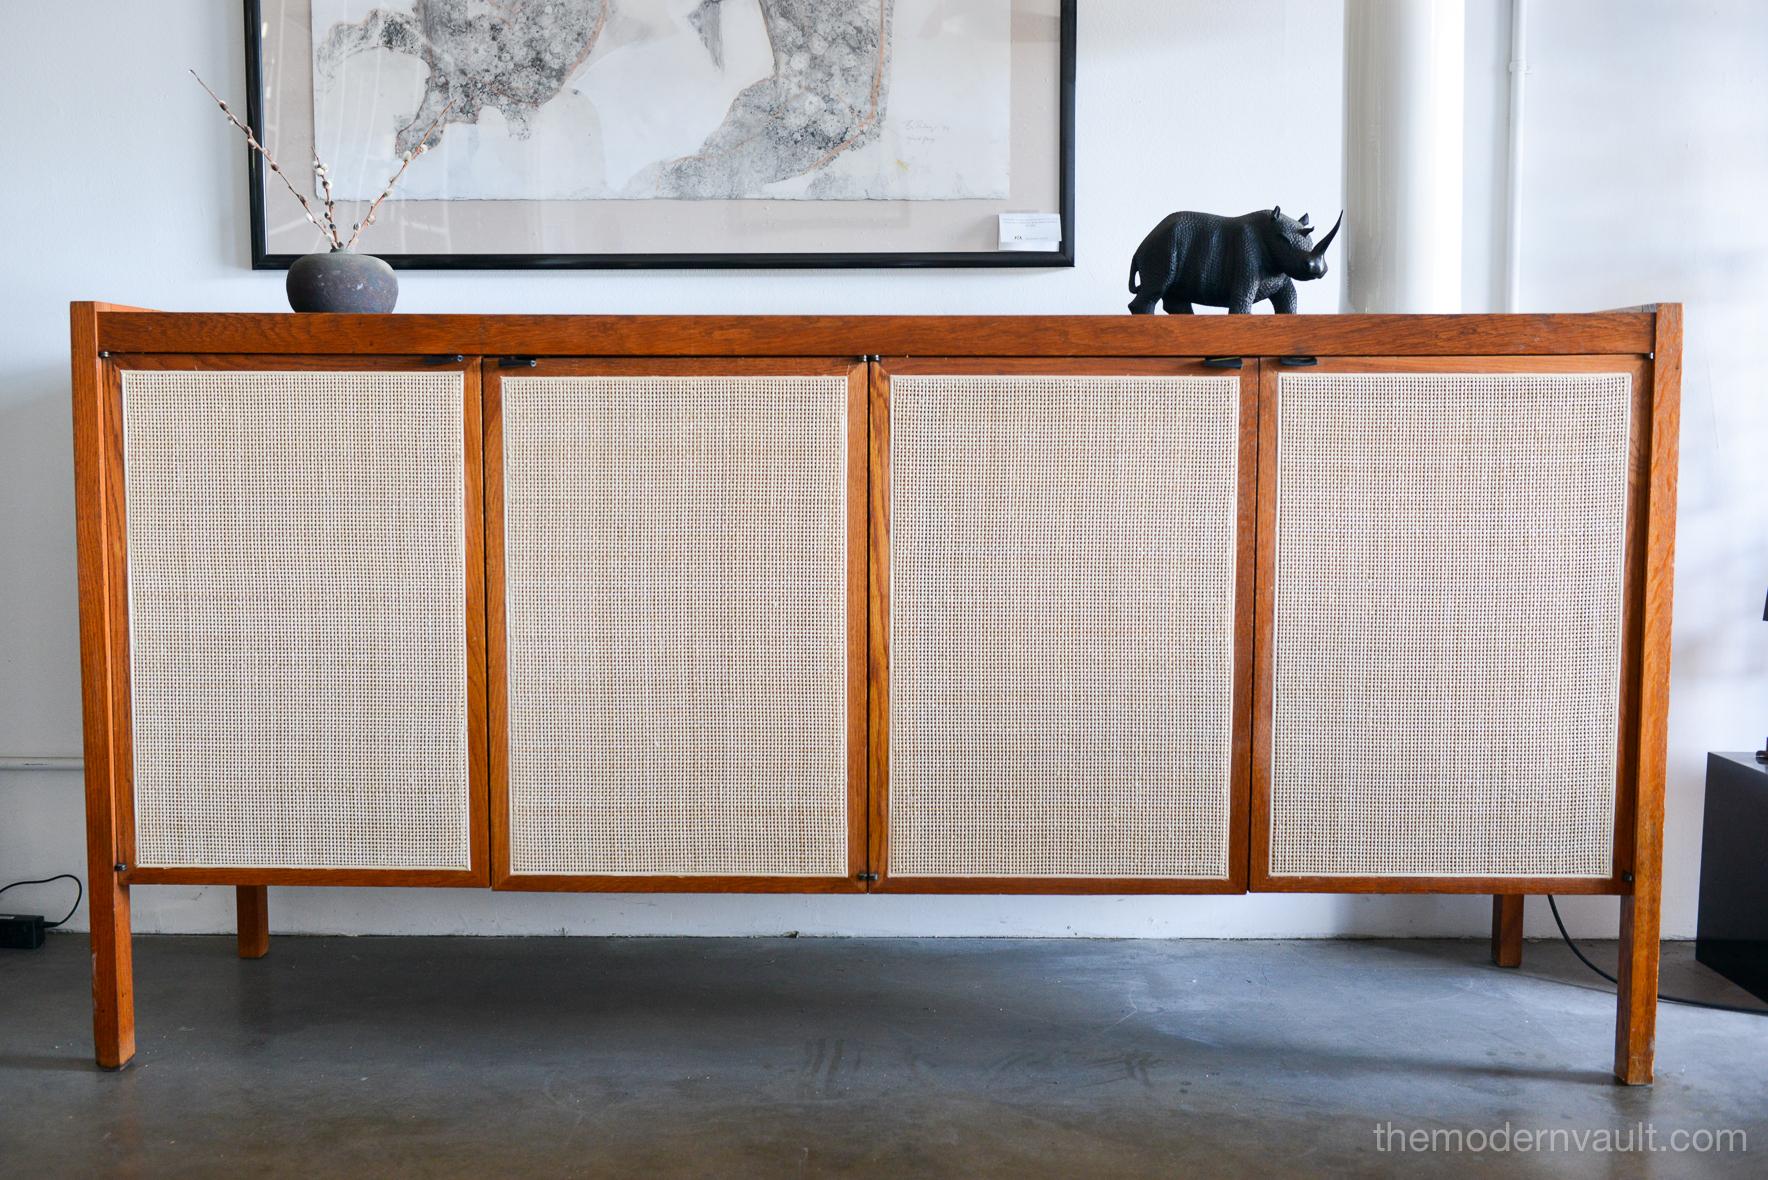 Cane front credenza with micarta top by Jack Cartwright, circa 1960. New coordinating black leather pulls and new cane doors. Oak frame with teak side panels in very good condition. Substantial, large piece perfect for a credenza or dining room